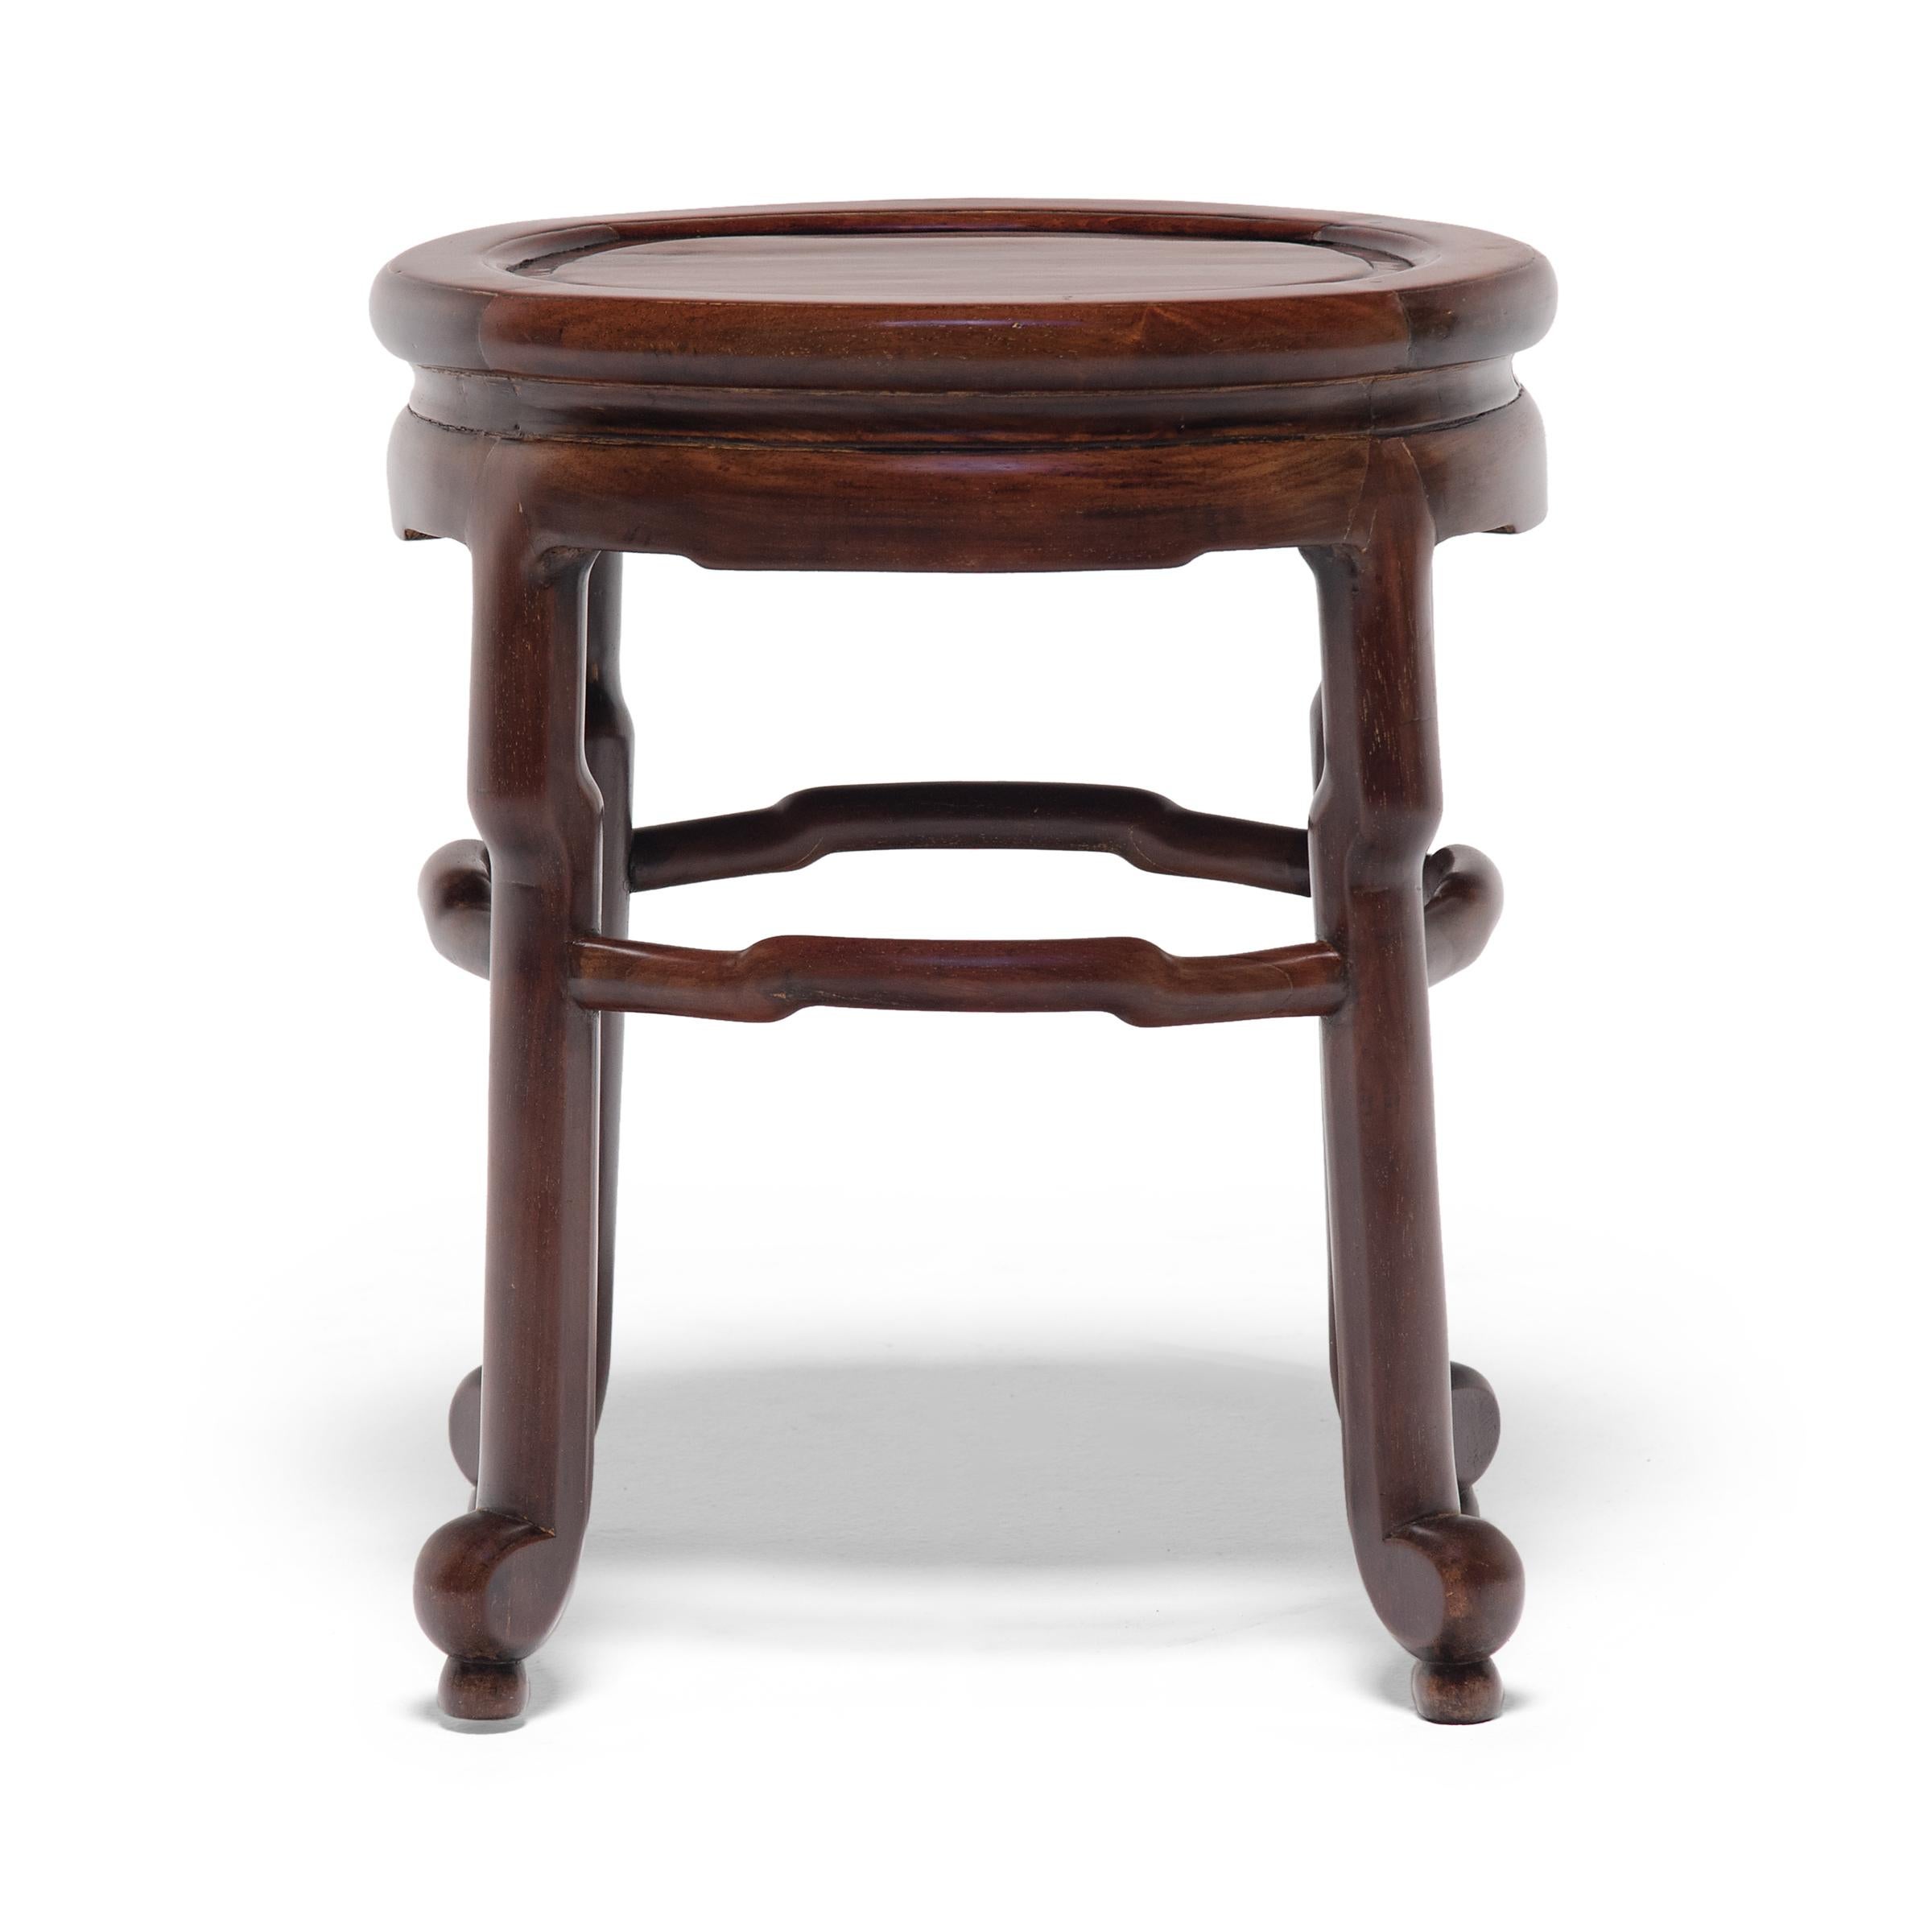 When the Art Deco movement reached major Chinese cities like Tianjin and Shanghai, the design aesthetic that emerged was the perfect intersection of European modernism and Ming-dynasty refinement. This oval stool is a product of the era, crafted in